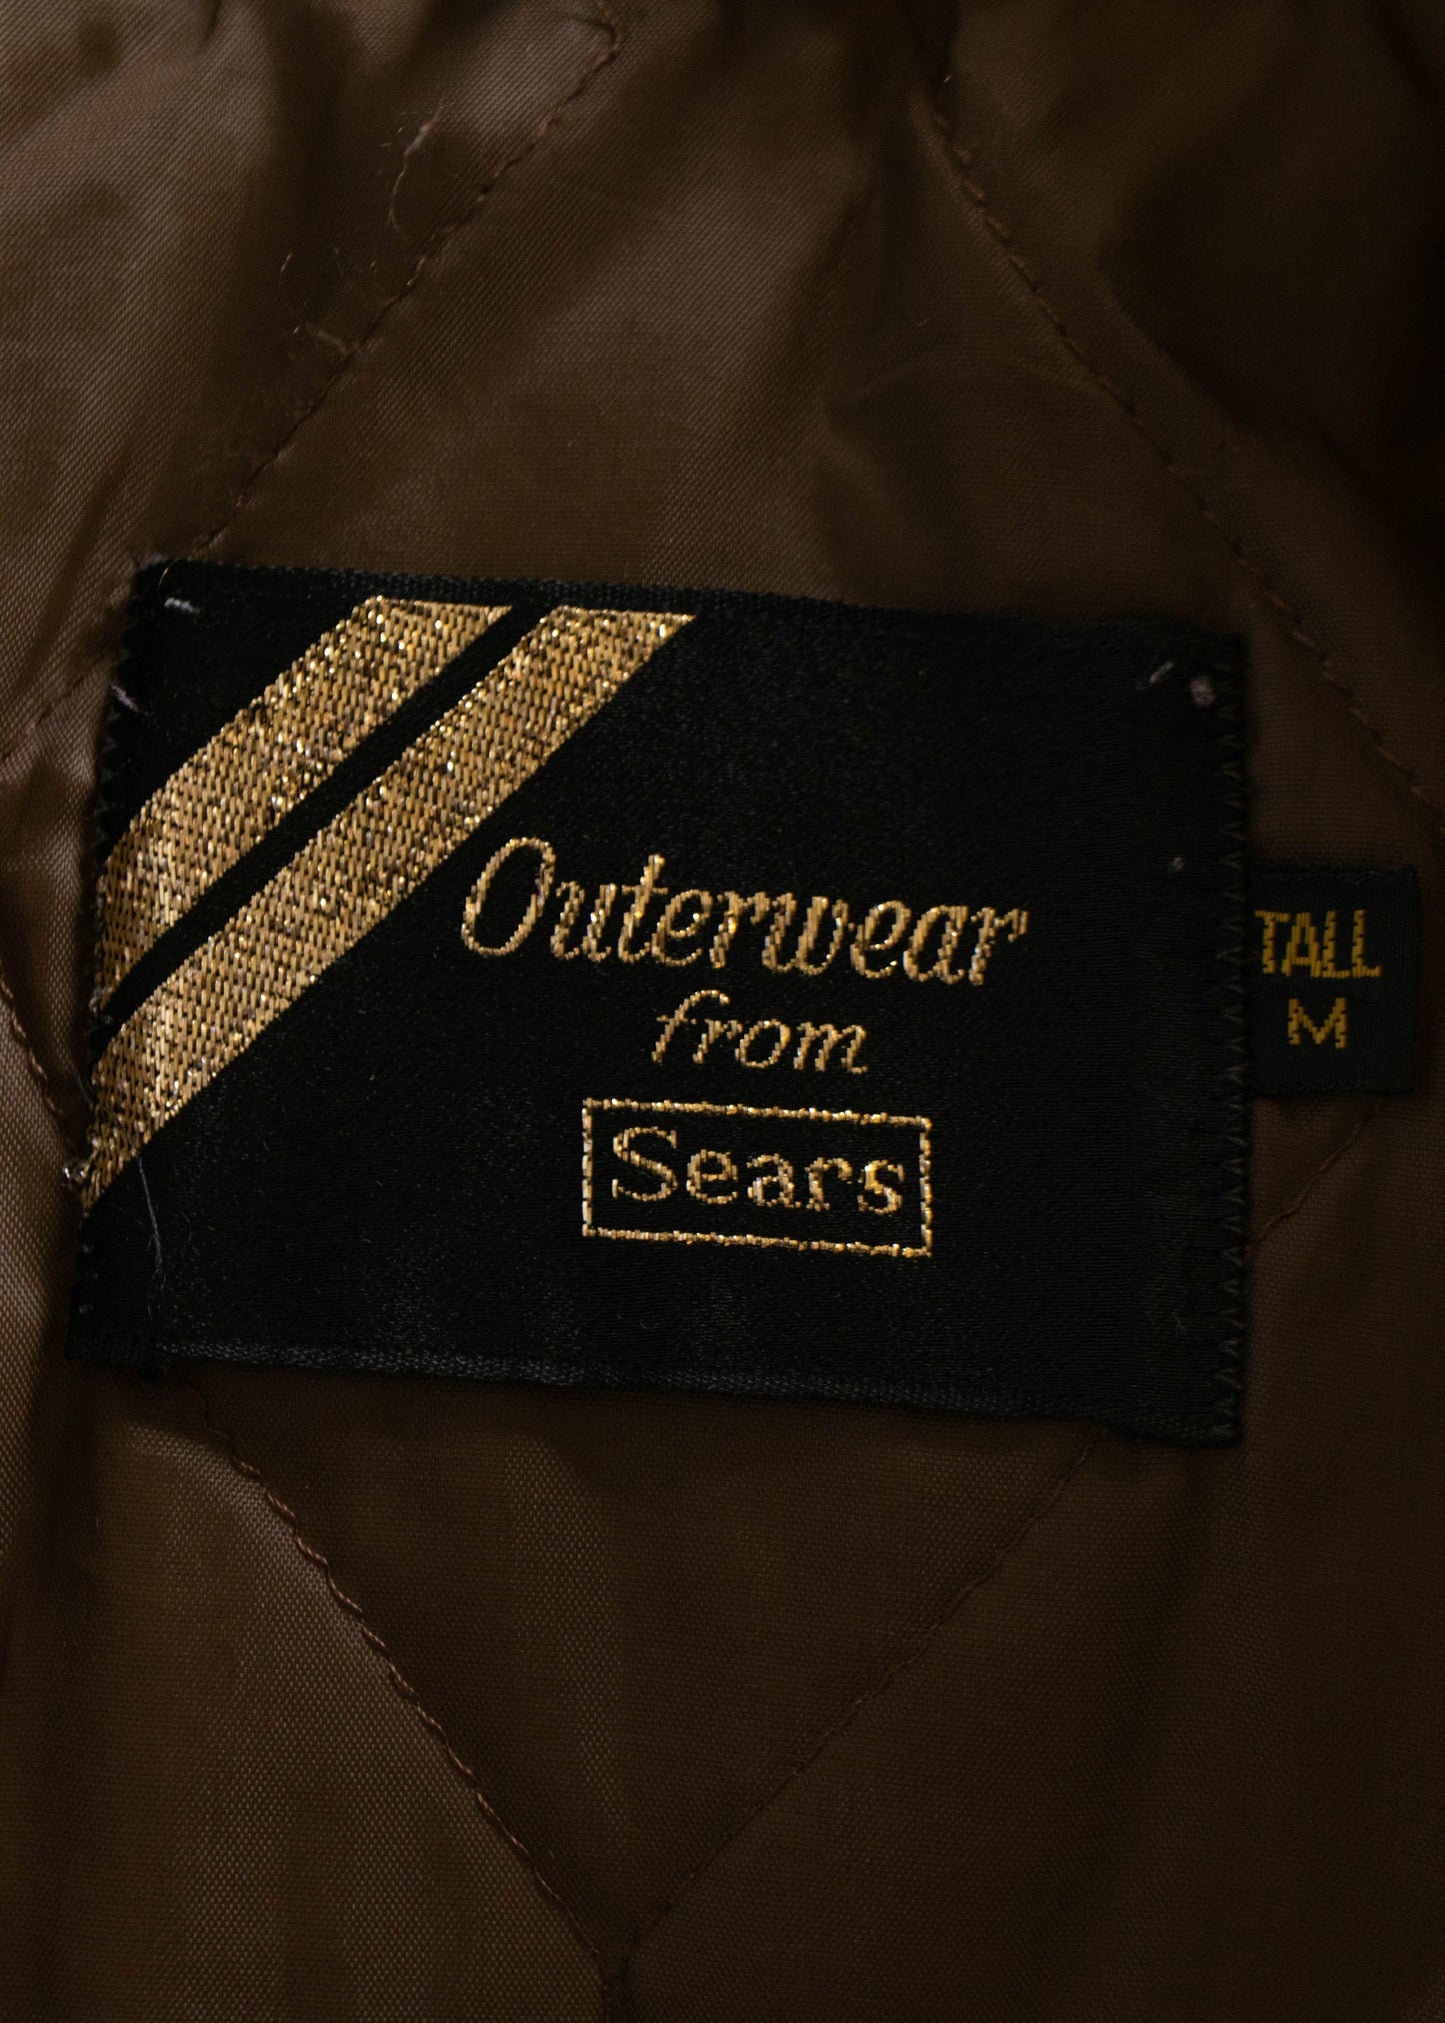 1980s Sears Puffer Jacket Size S/M